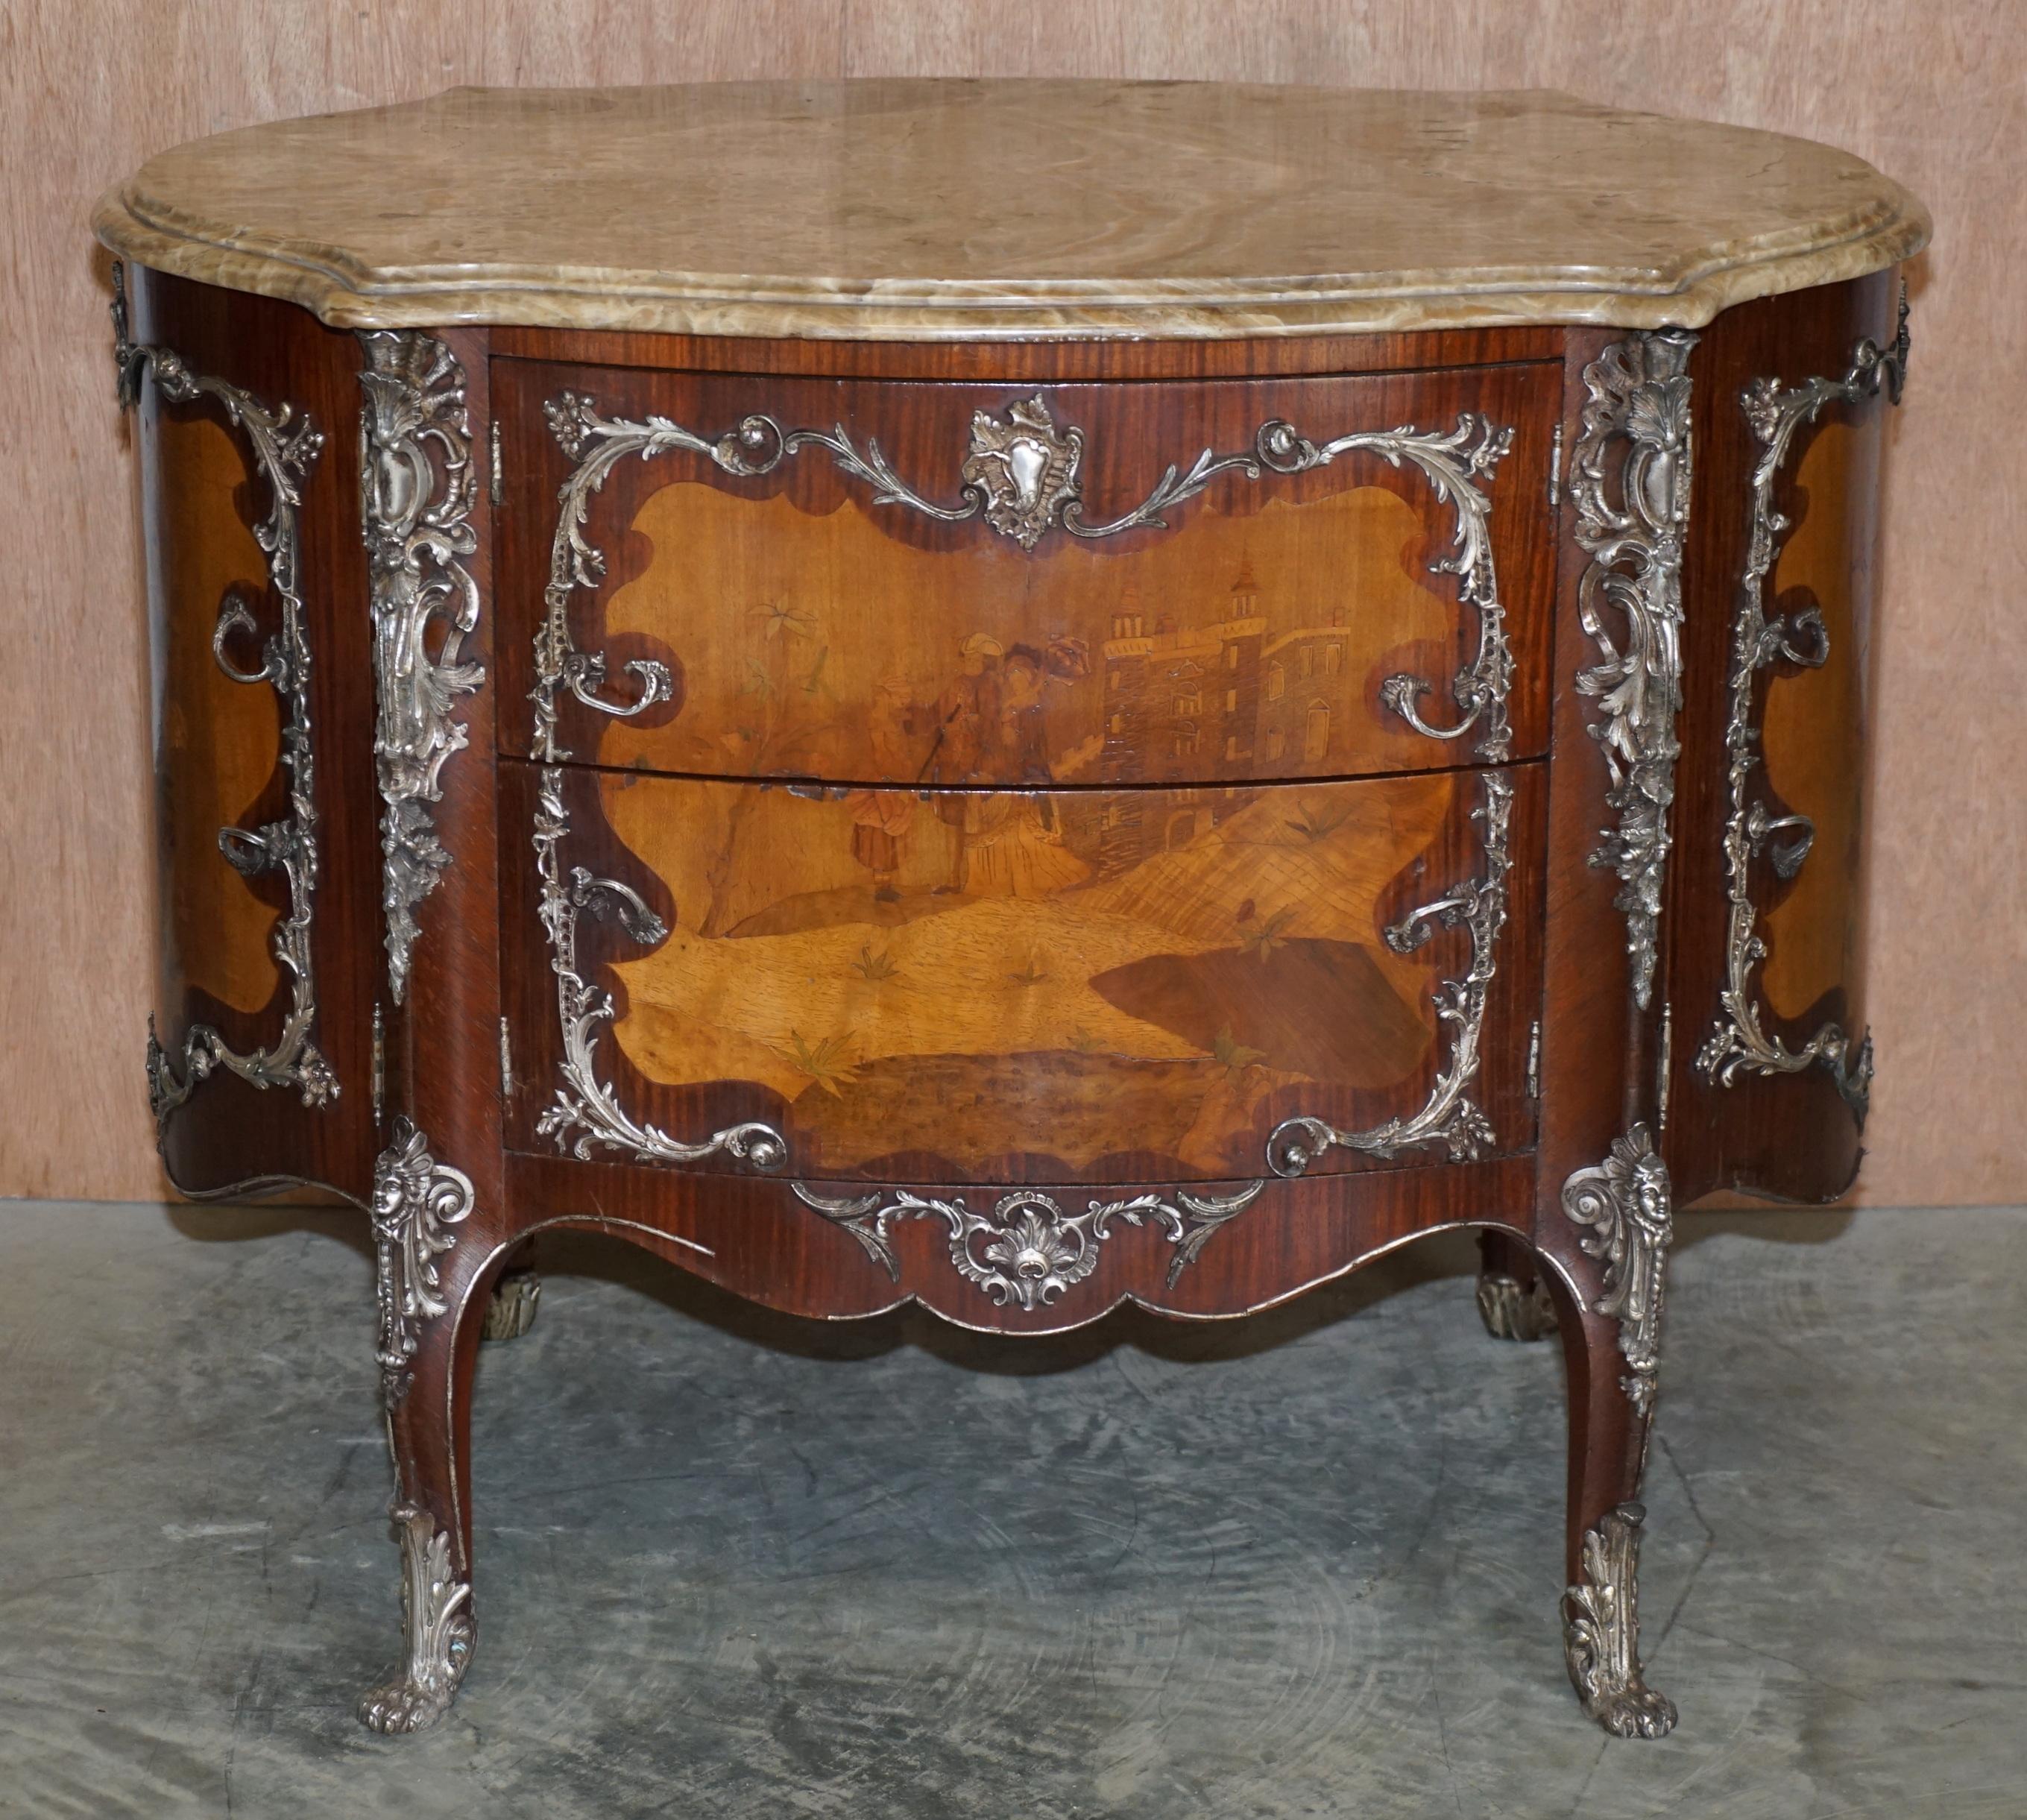 Rare & Collectable Germain Landrin circa 1750 French Marble Kingwood Sideboard For Sale 6